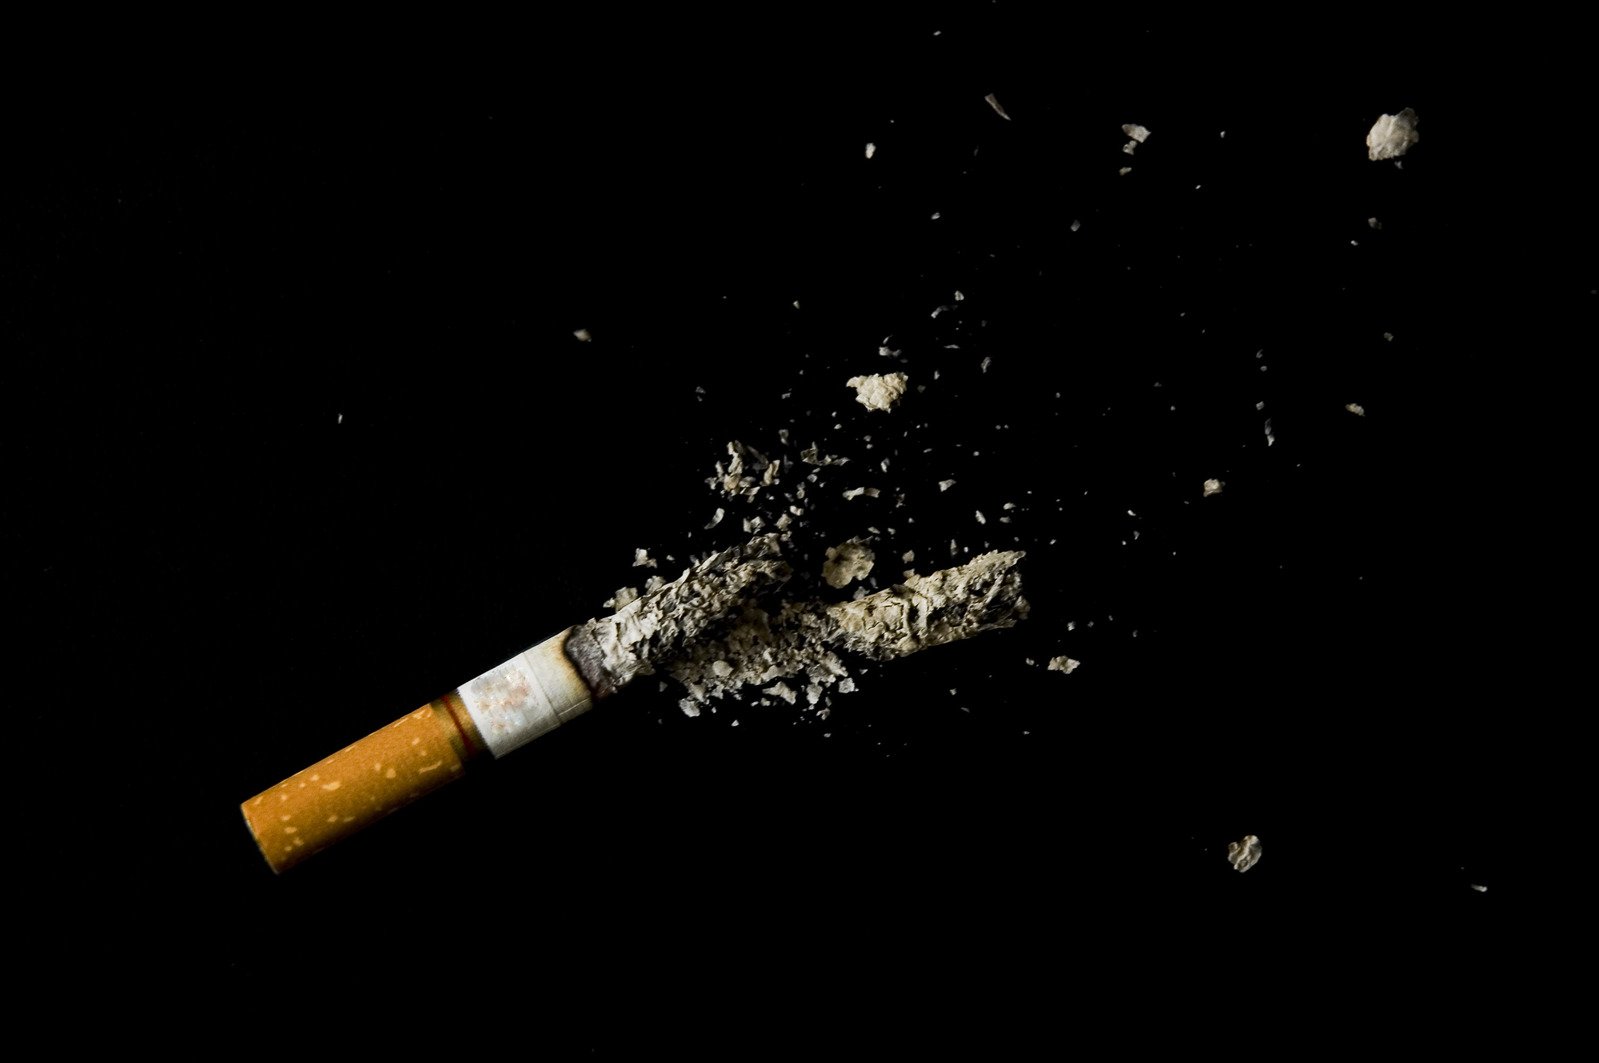 an opened cigarette is partially consumed and spilling in the air